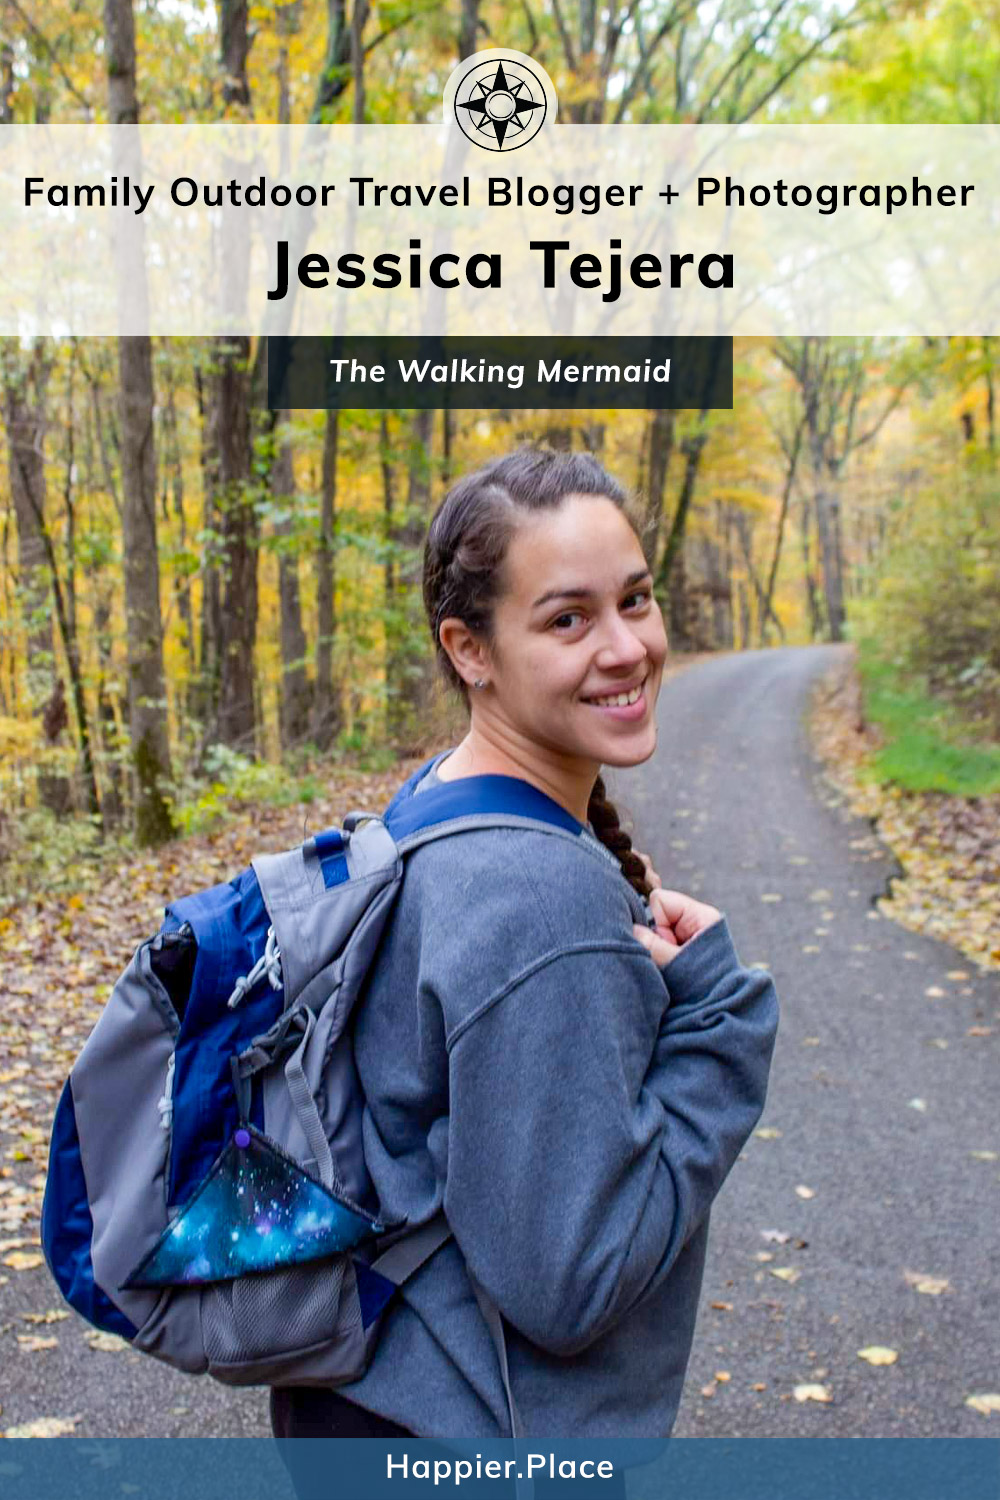 Jessica Tejera, The Walking Mermaid, Family Outdoor Travel Blogger and Photographer